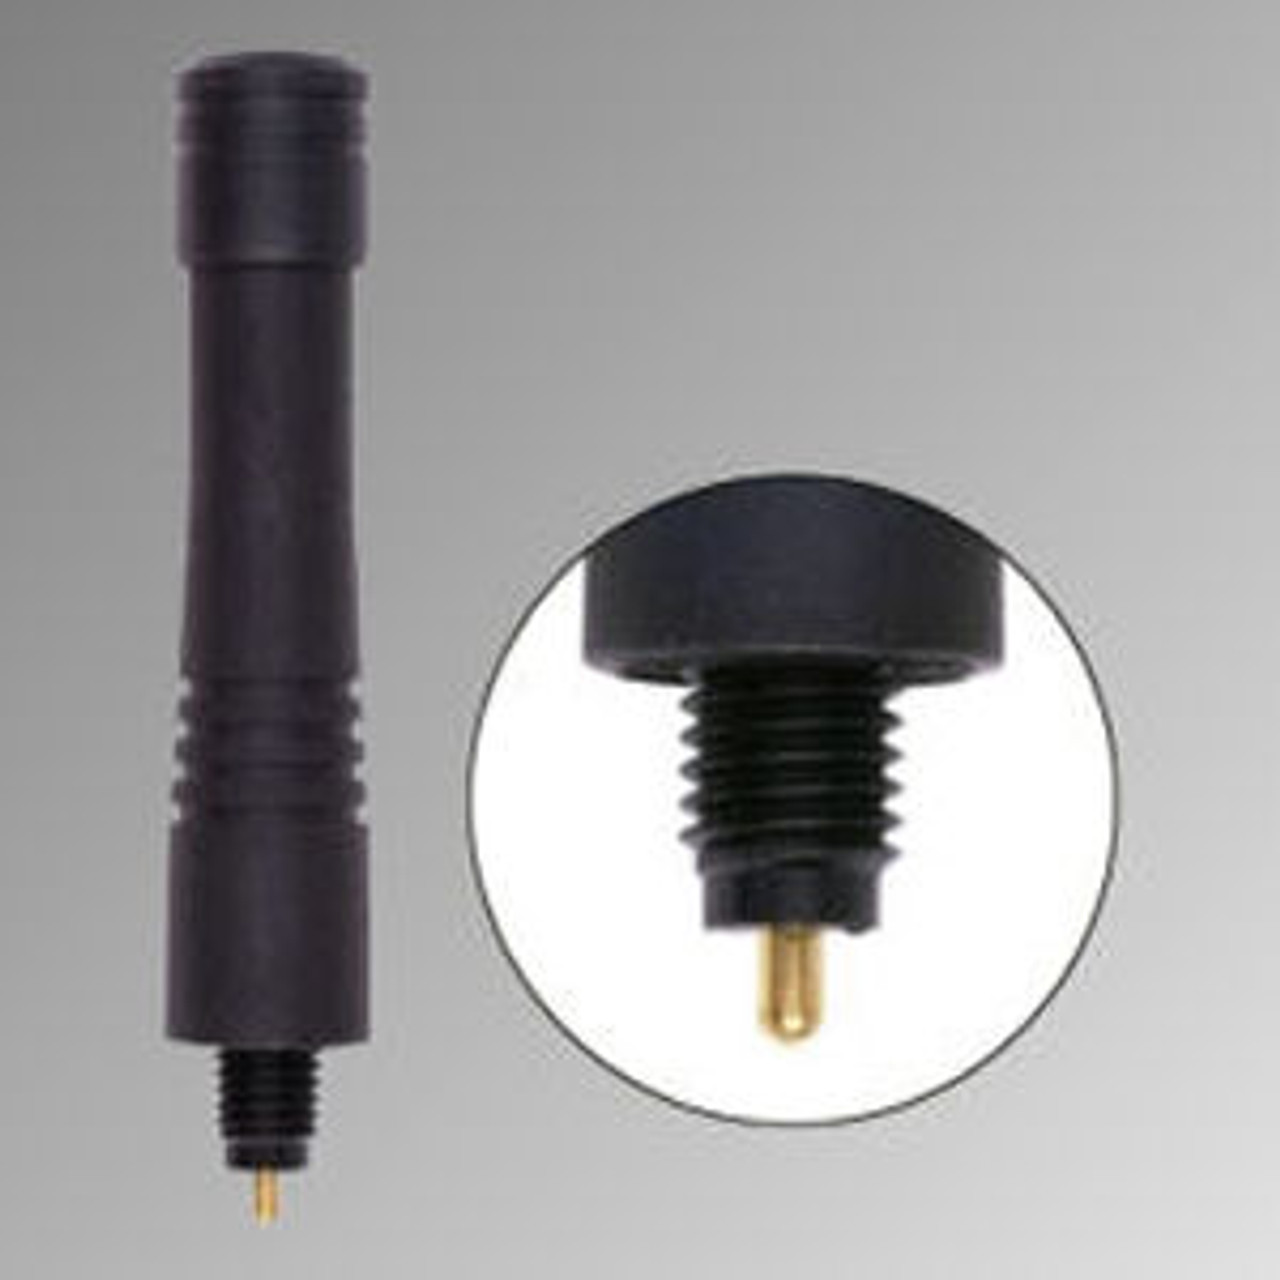 Replacement For M/A-Com HTNC1G Antenna - 3.75", UHF, 450-470 MHz